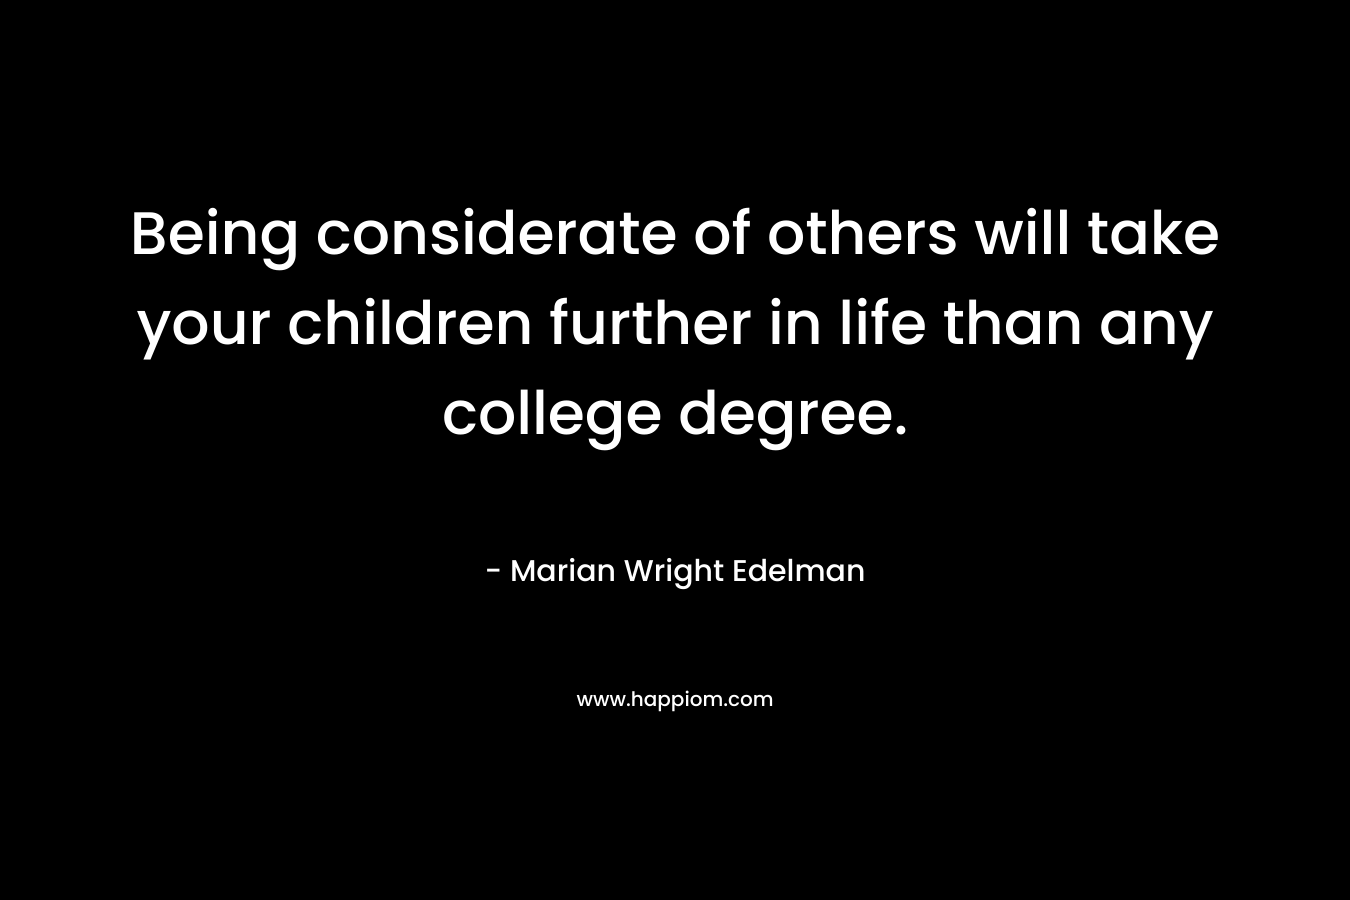 Being considerate of others will take your children further in life than any college degree. – Marian Wright Edelman